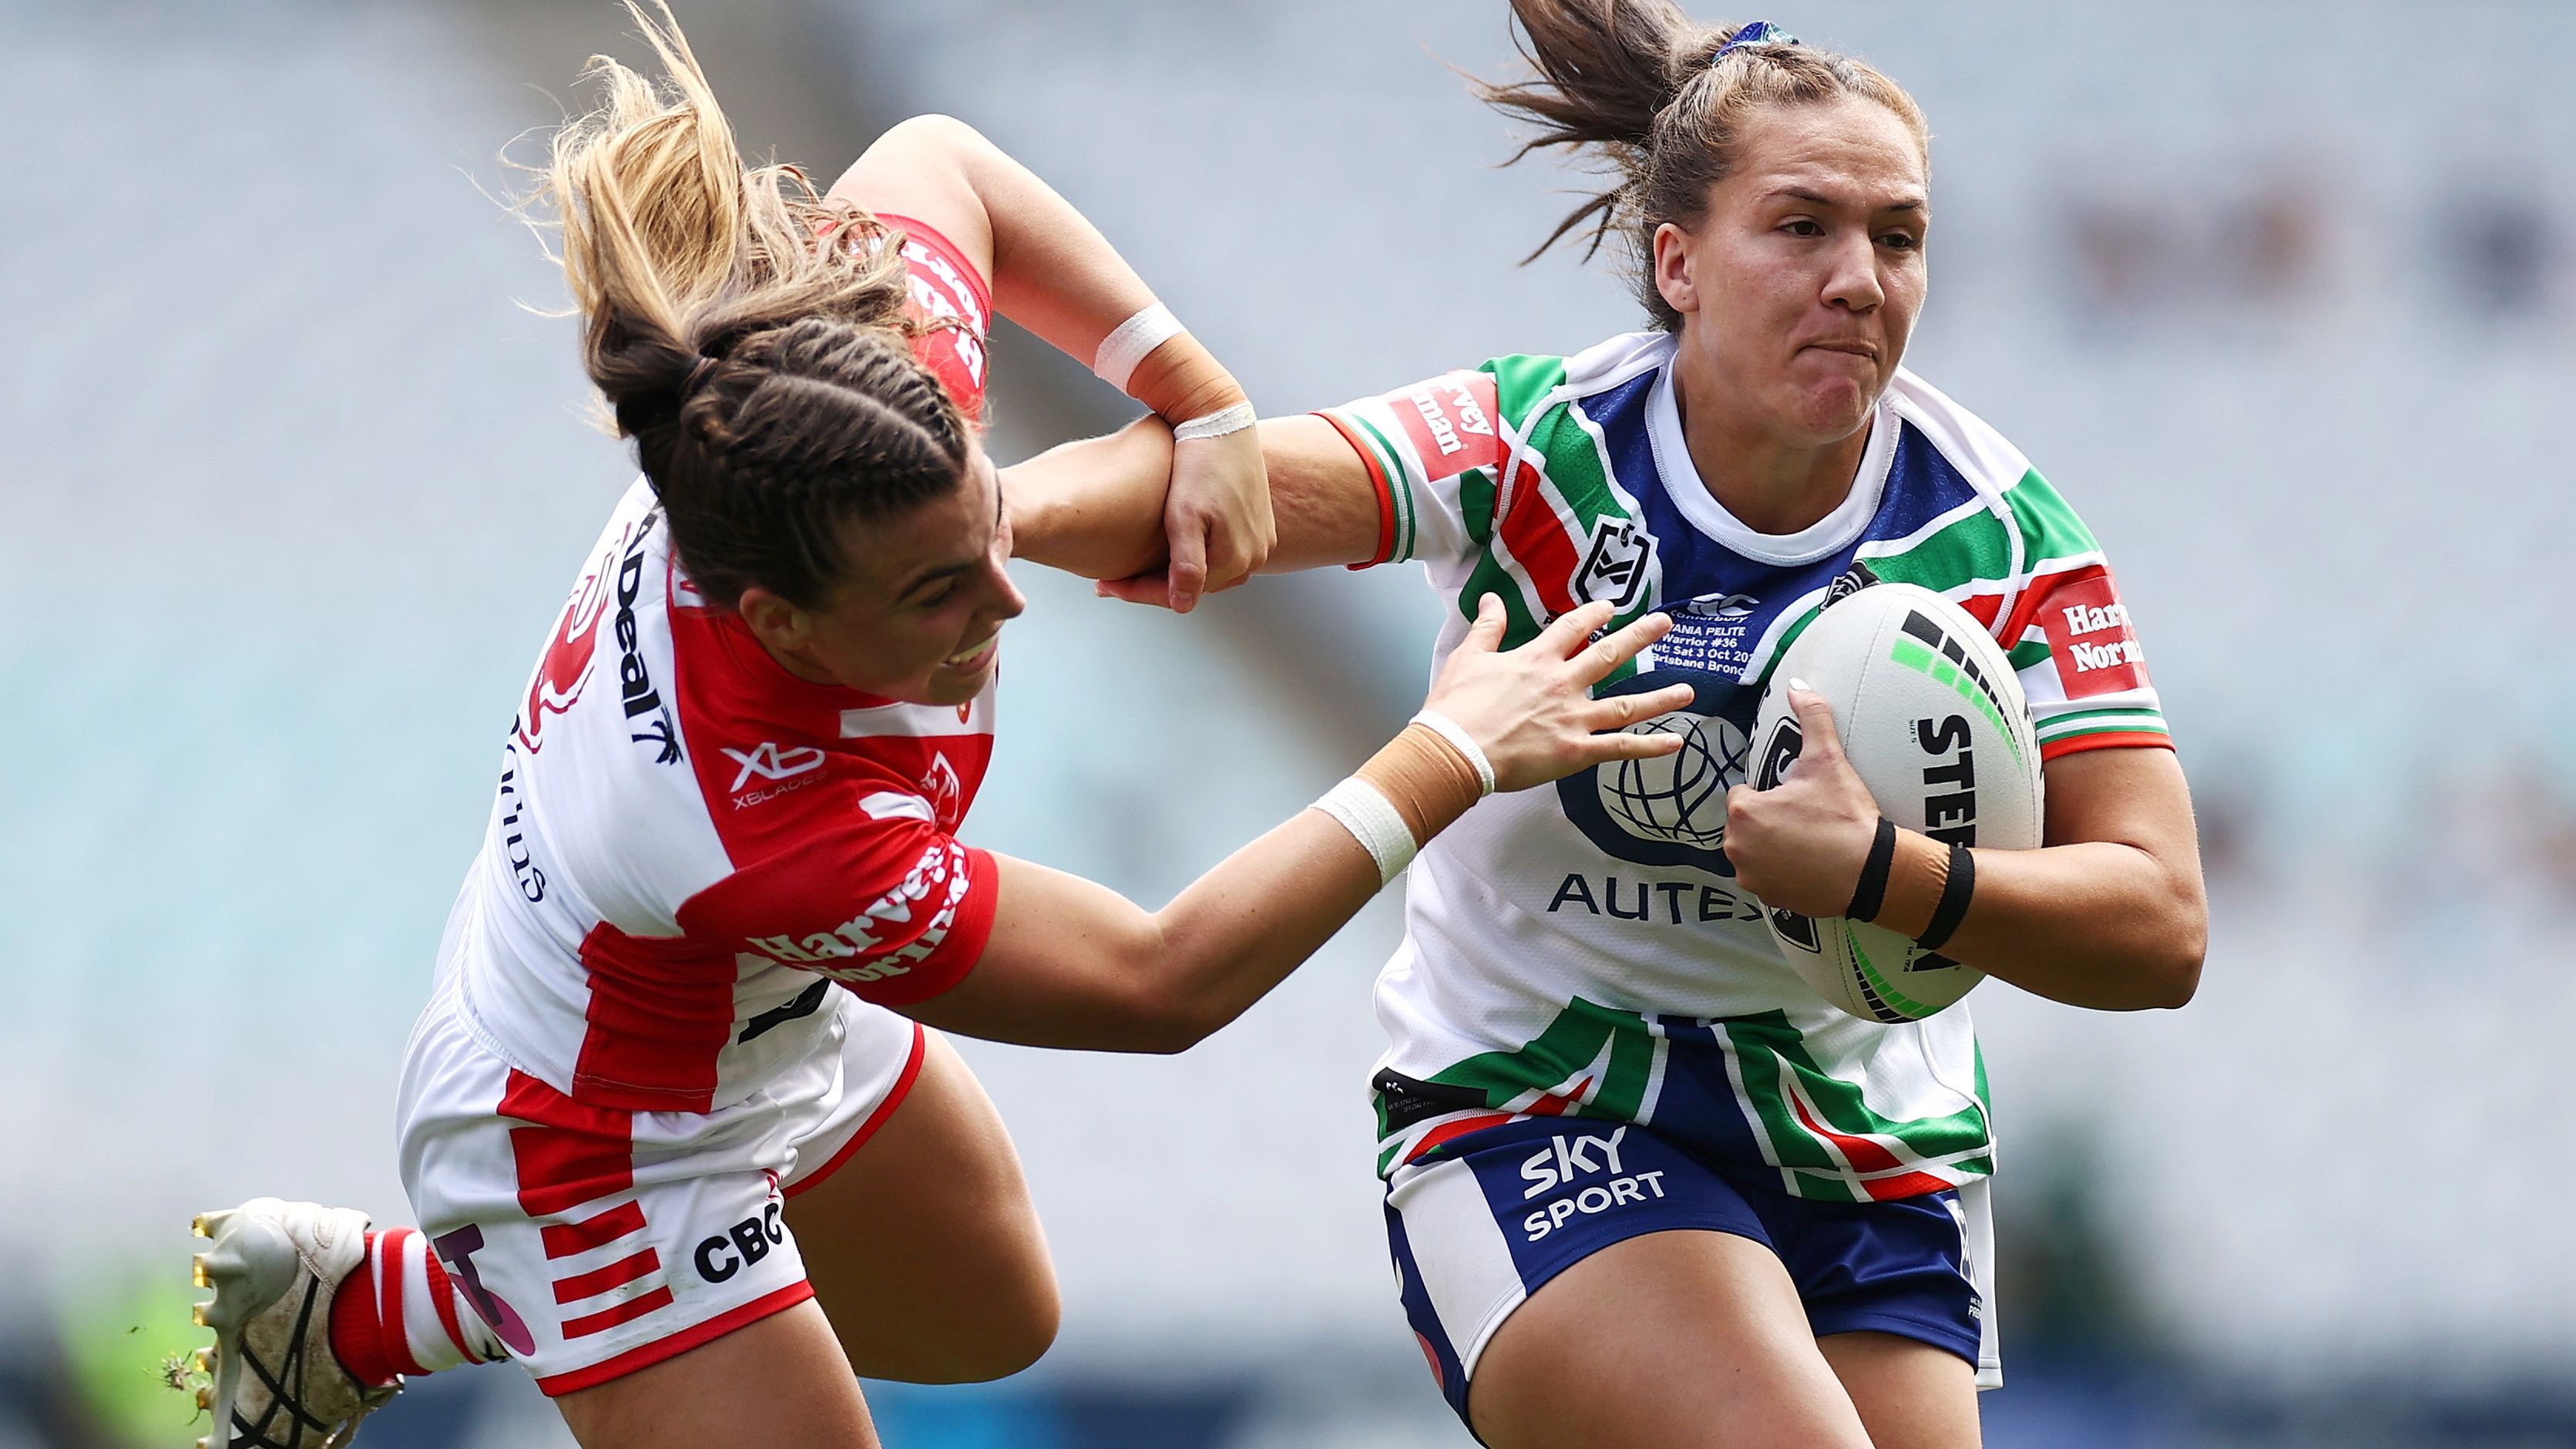 Warriors return, Bulldogs join NRLW as two expansion teams confirmed